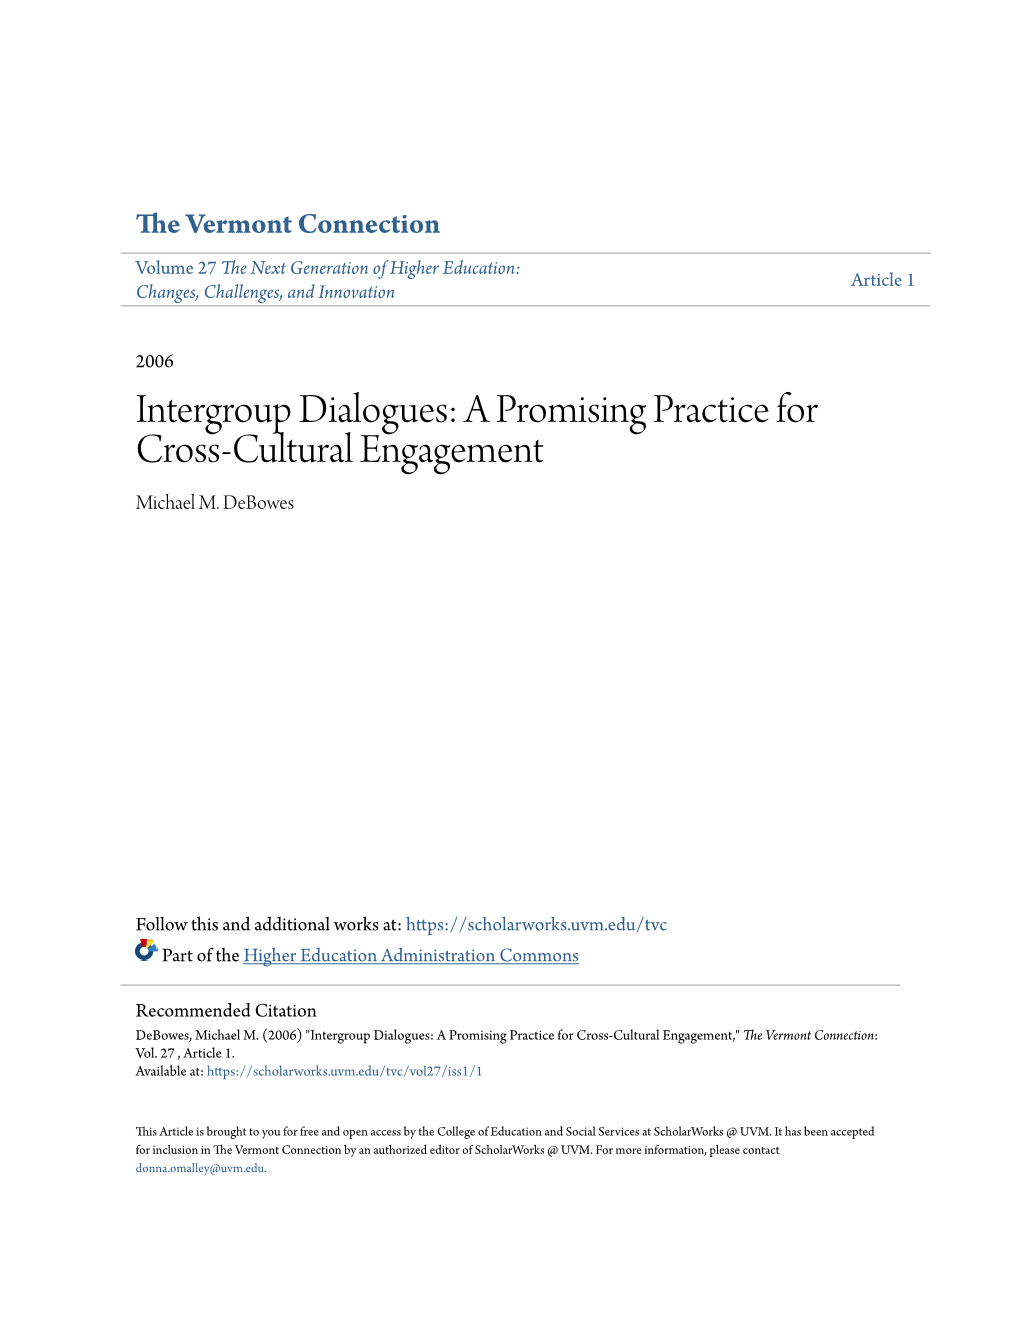 Intergroup Dialogues: a Promising Practice for Cross-Cultural Engagement Michael M